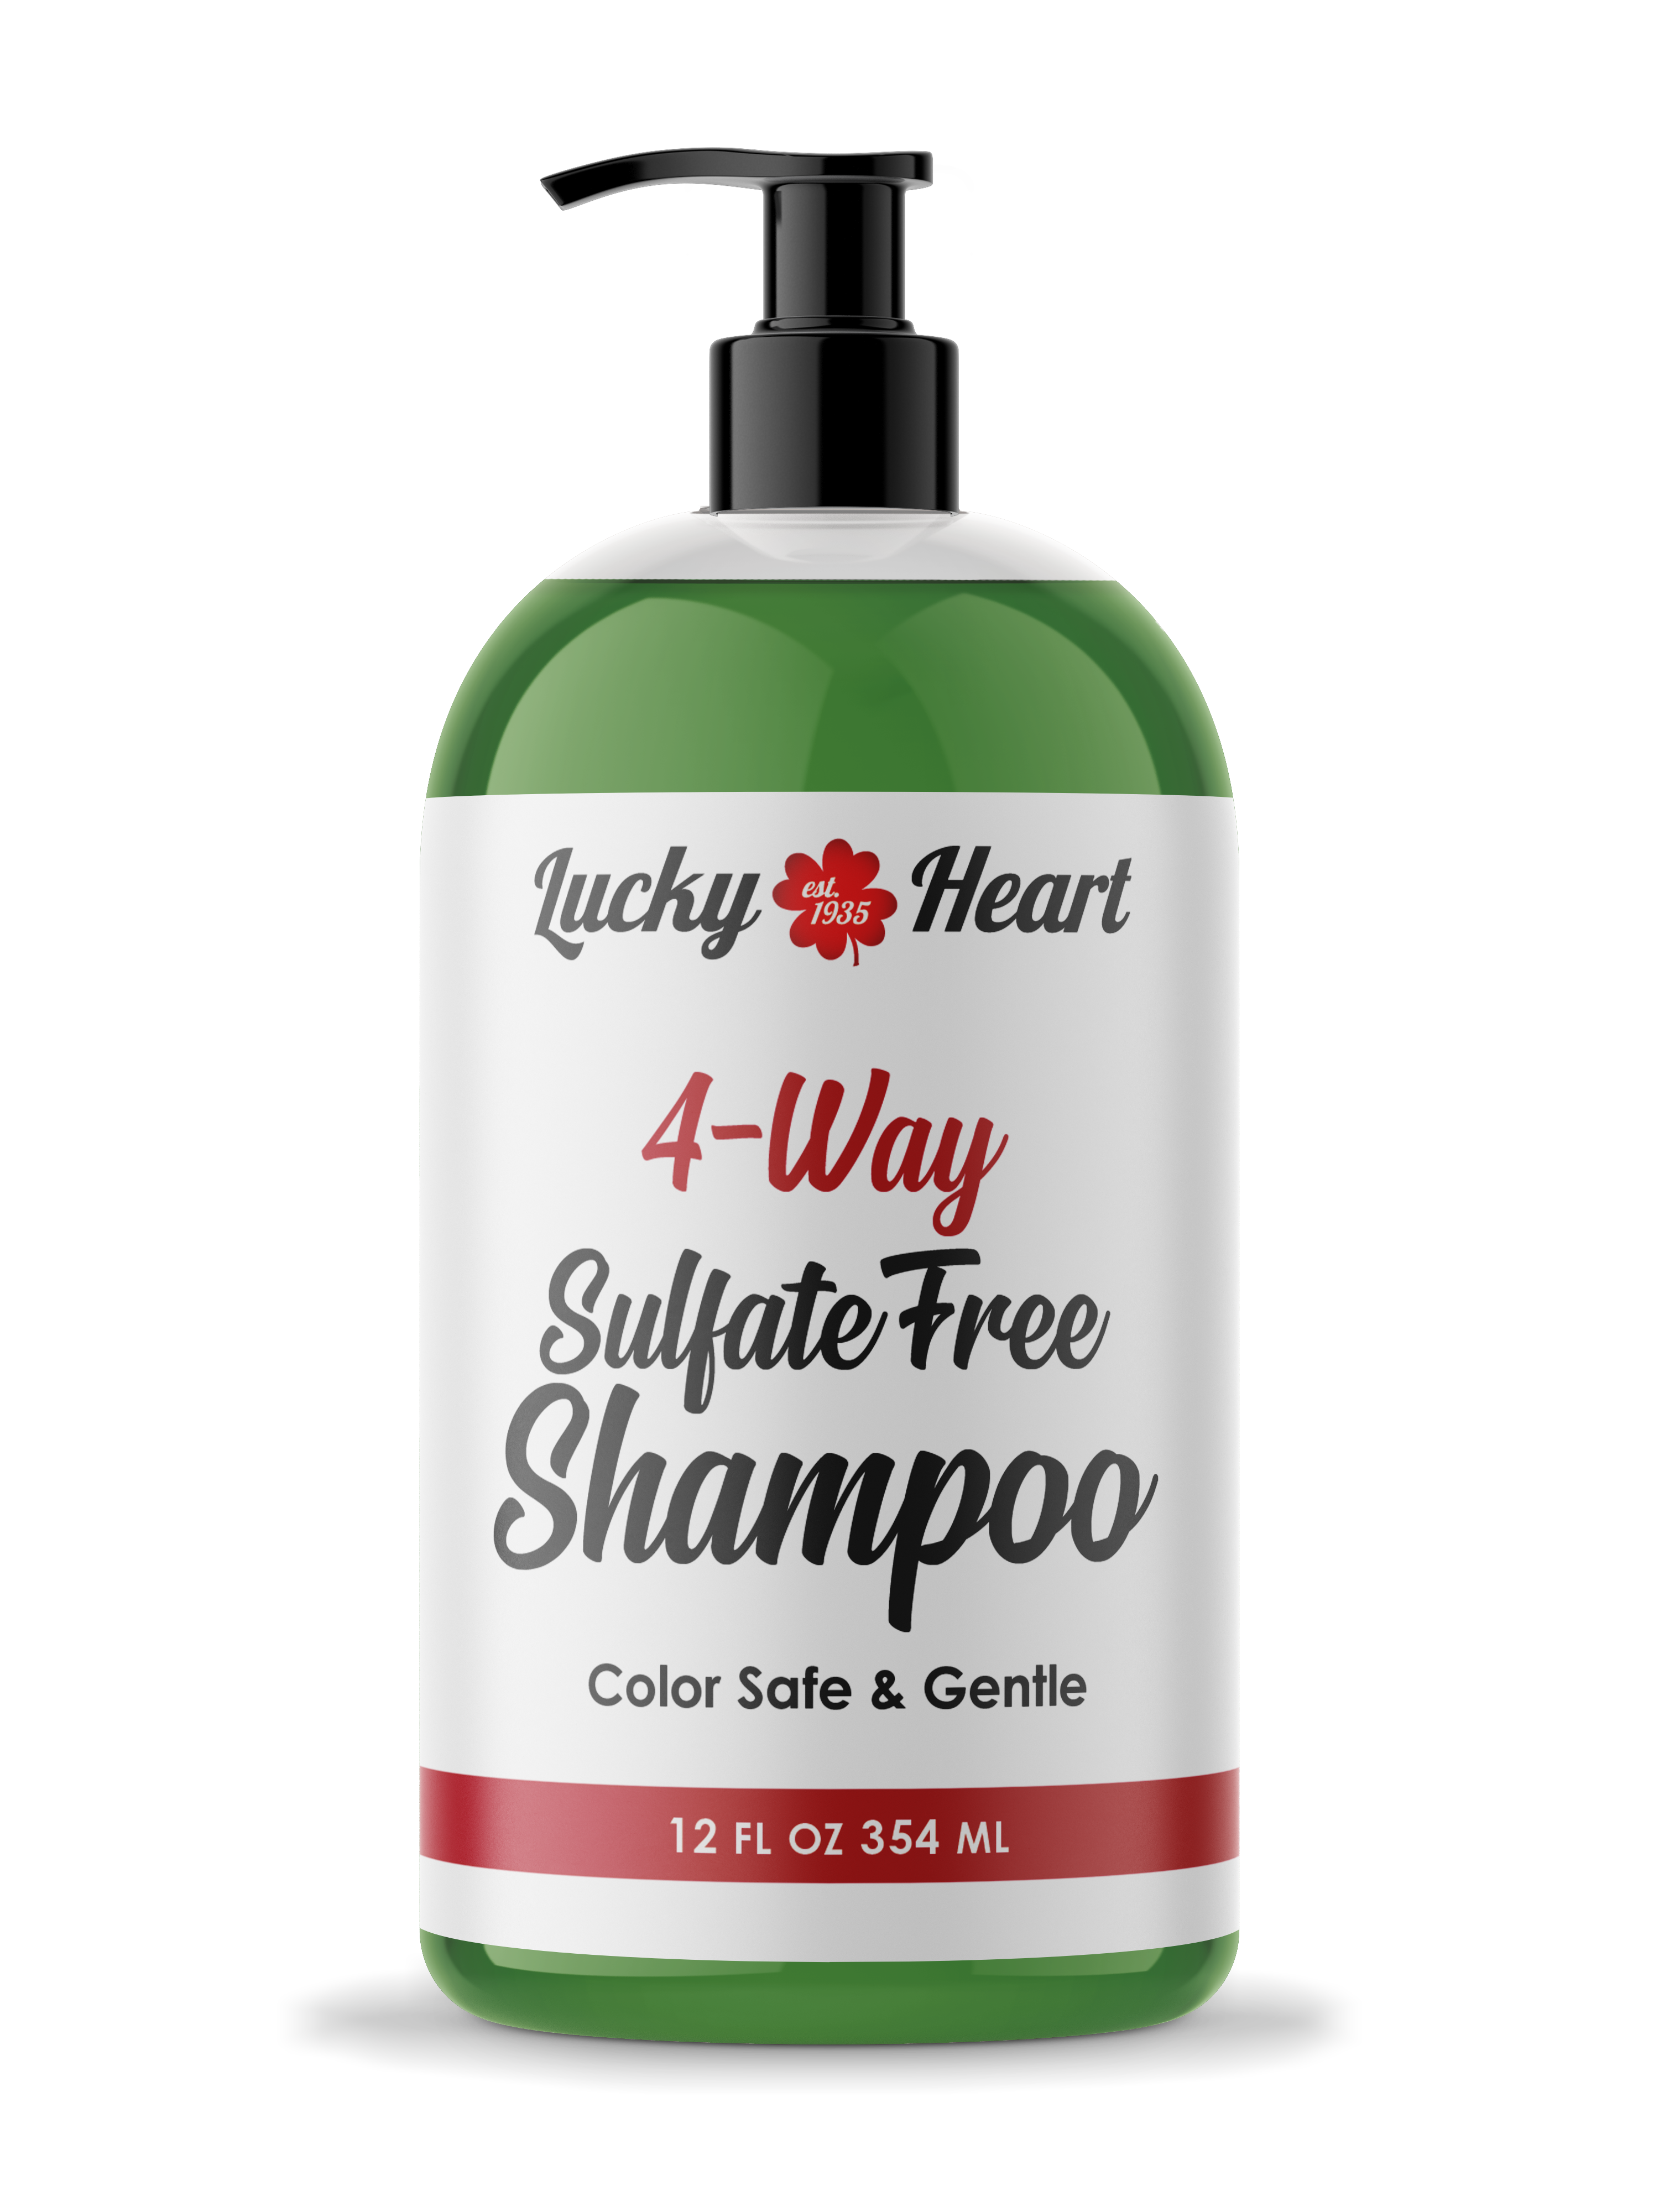 Color-safe, sulfate-free shampoo from Lucky Heart Cosmetics